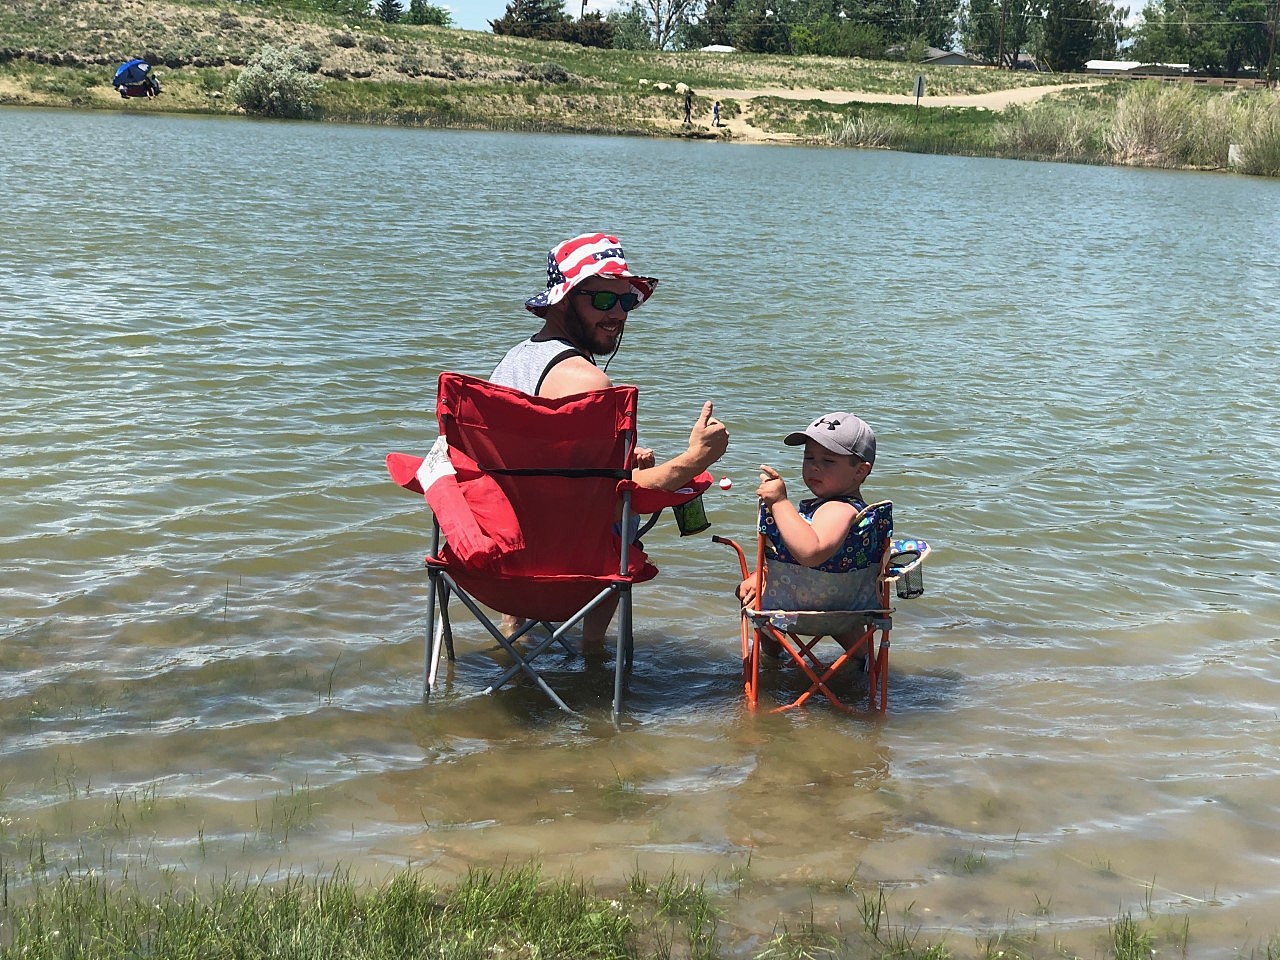 Kids Fishing Day Returns to Yesness Pond, Stocked with 1,500  'Catchable-Sized Trout